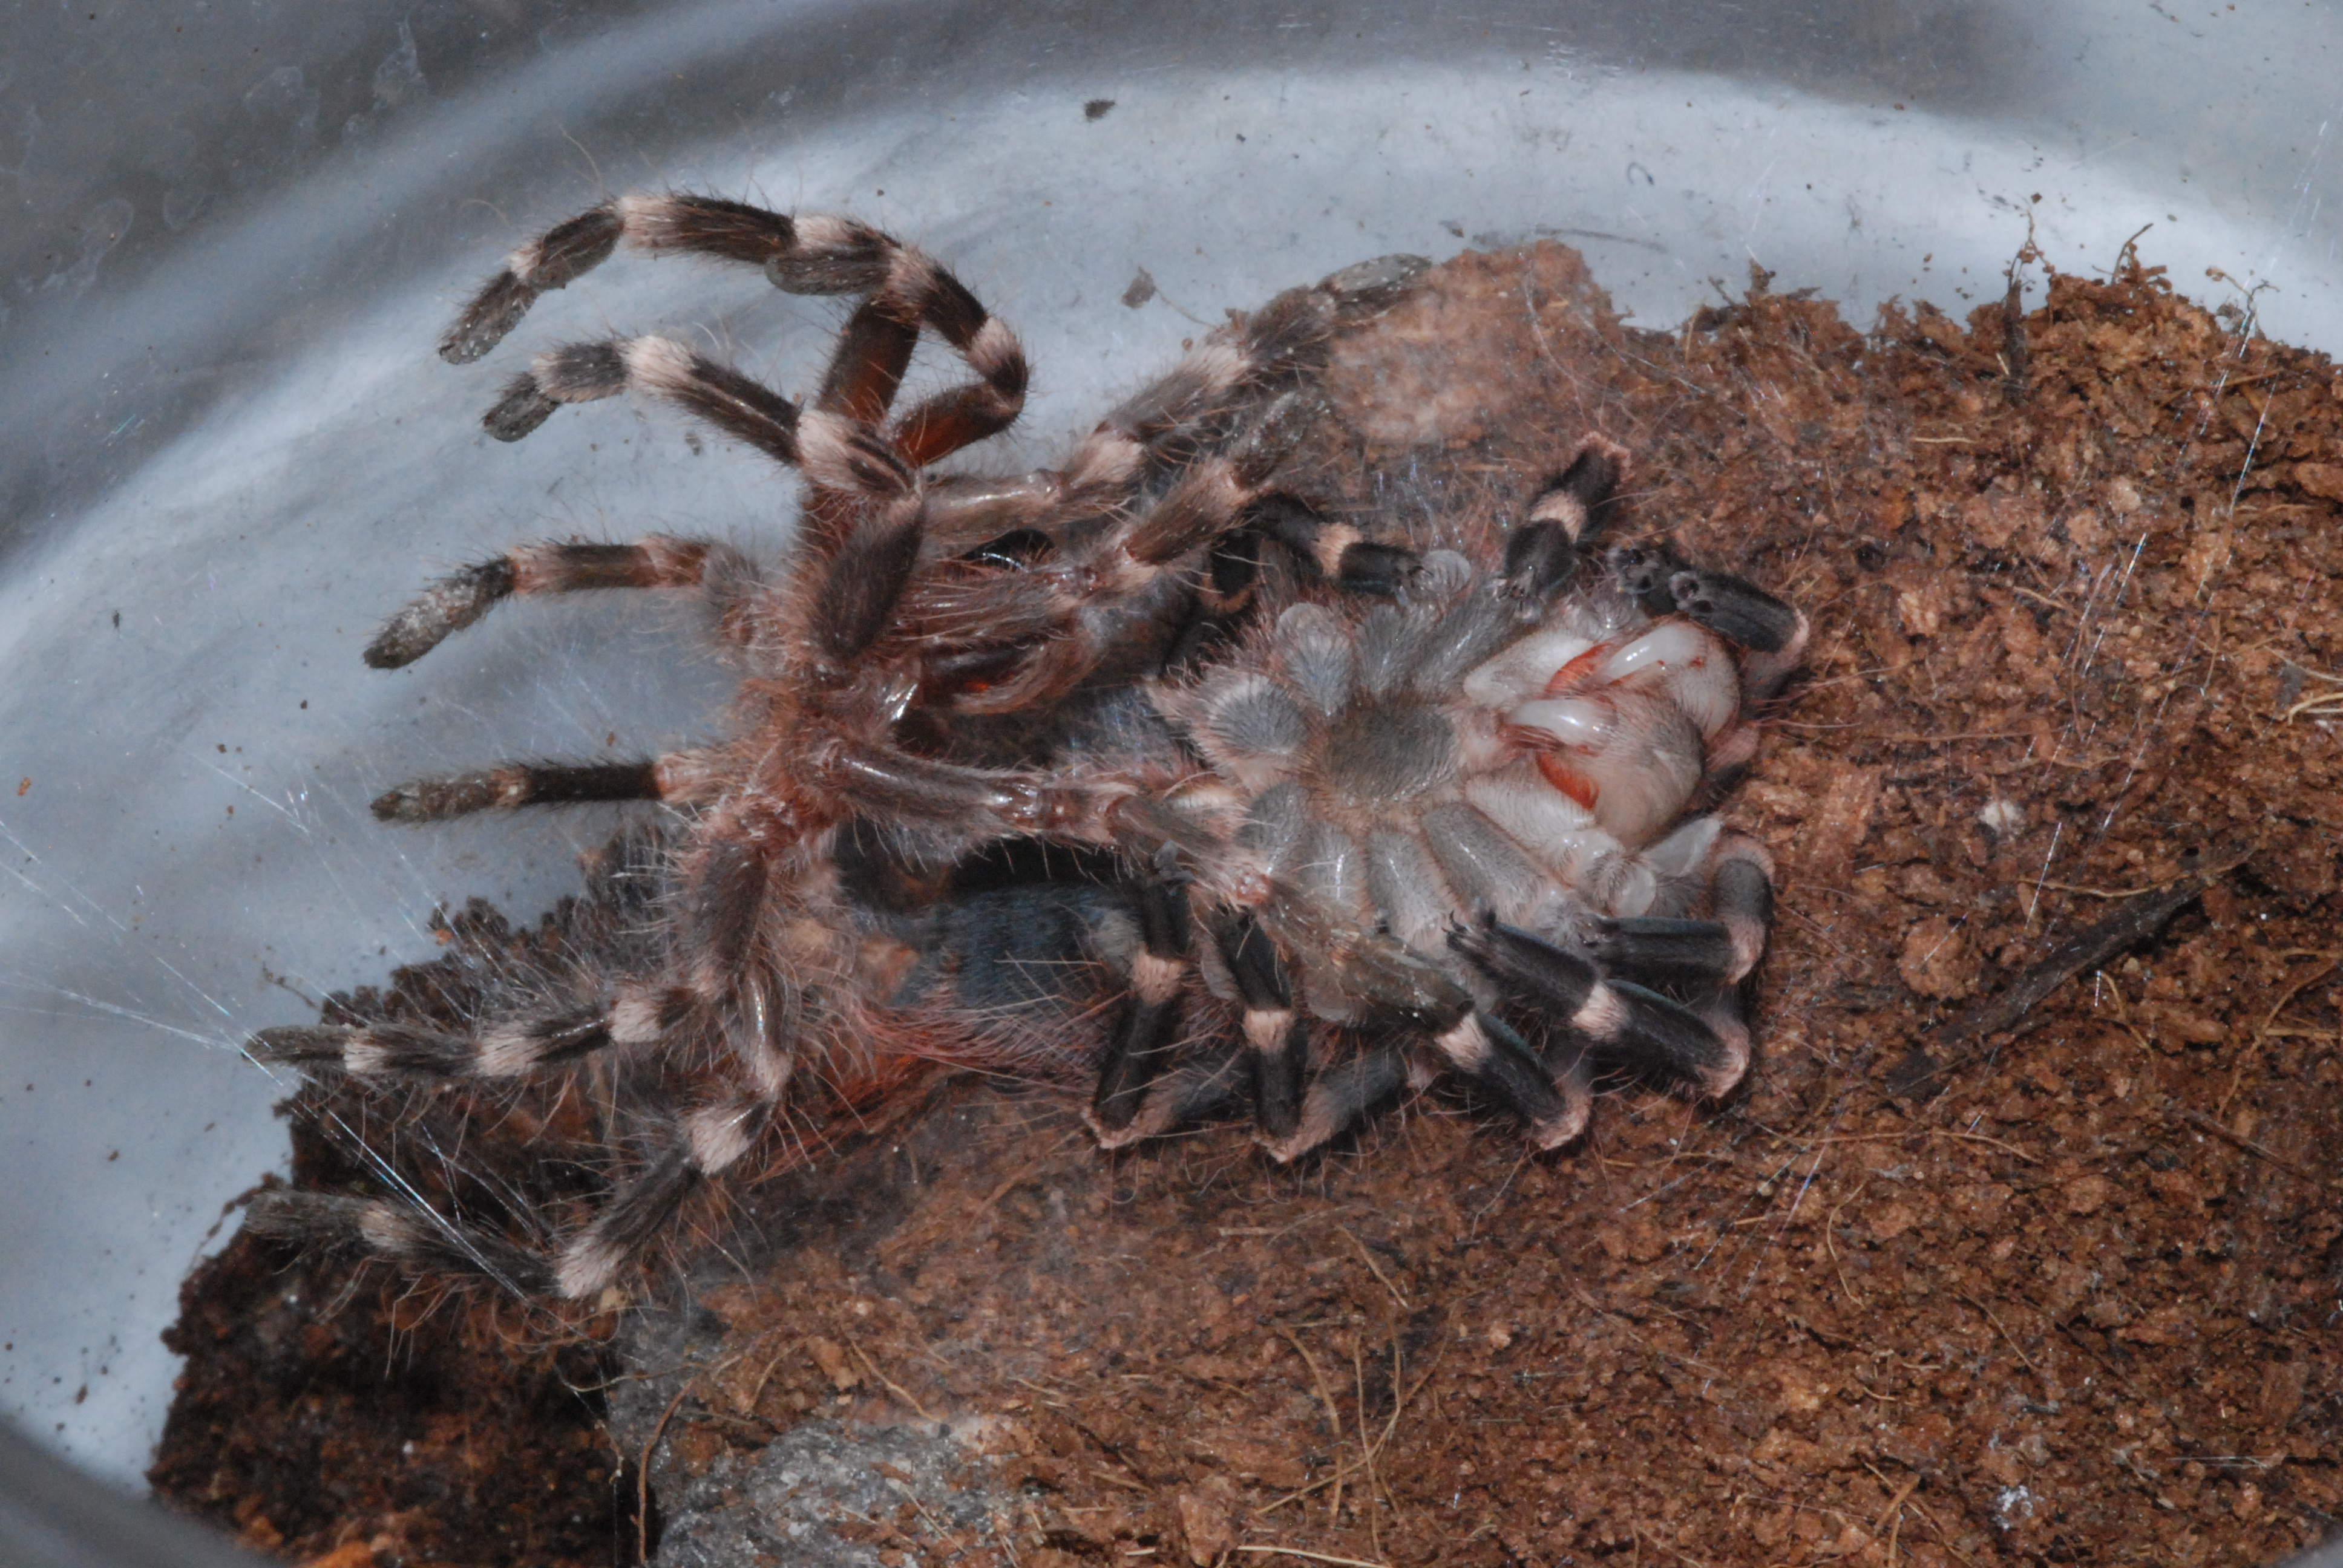 A Brazilian whiteknee tarantula (Acanthoscurria geniculata) in the process of molting. by Aaron Goodwin